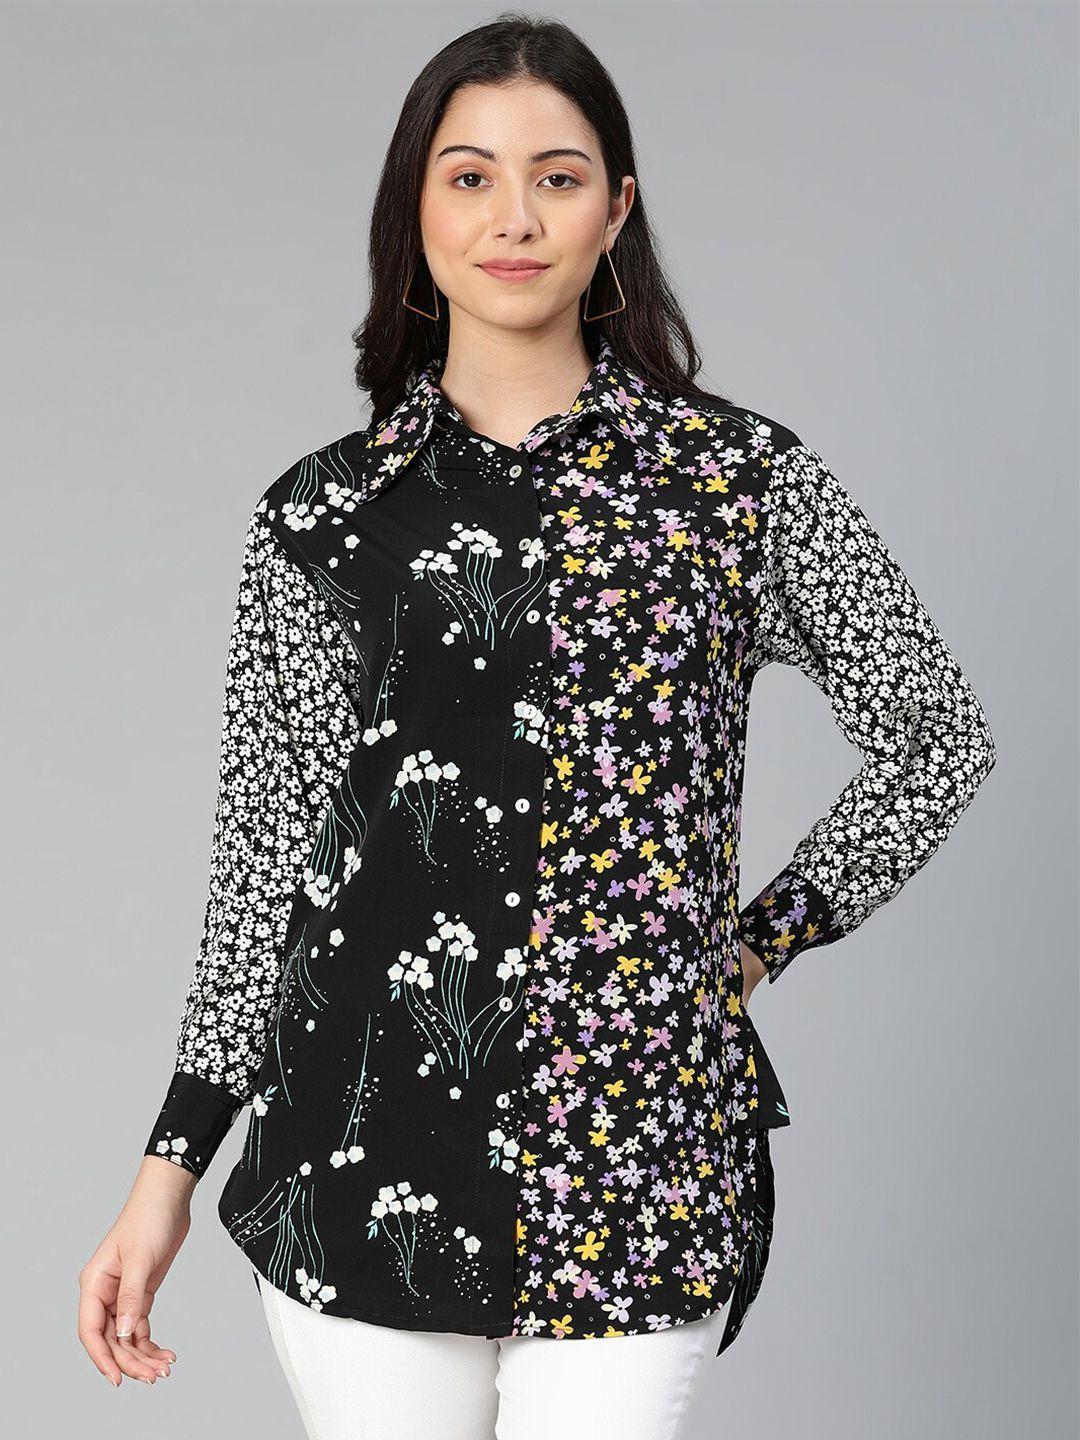 oxolloxo women black standard floral printed casual shirt